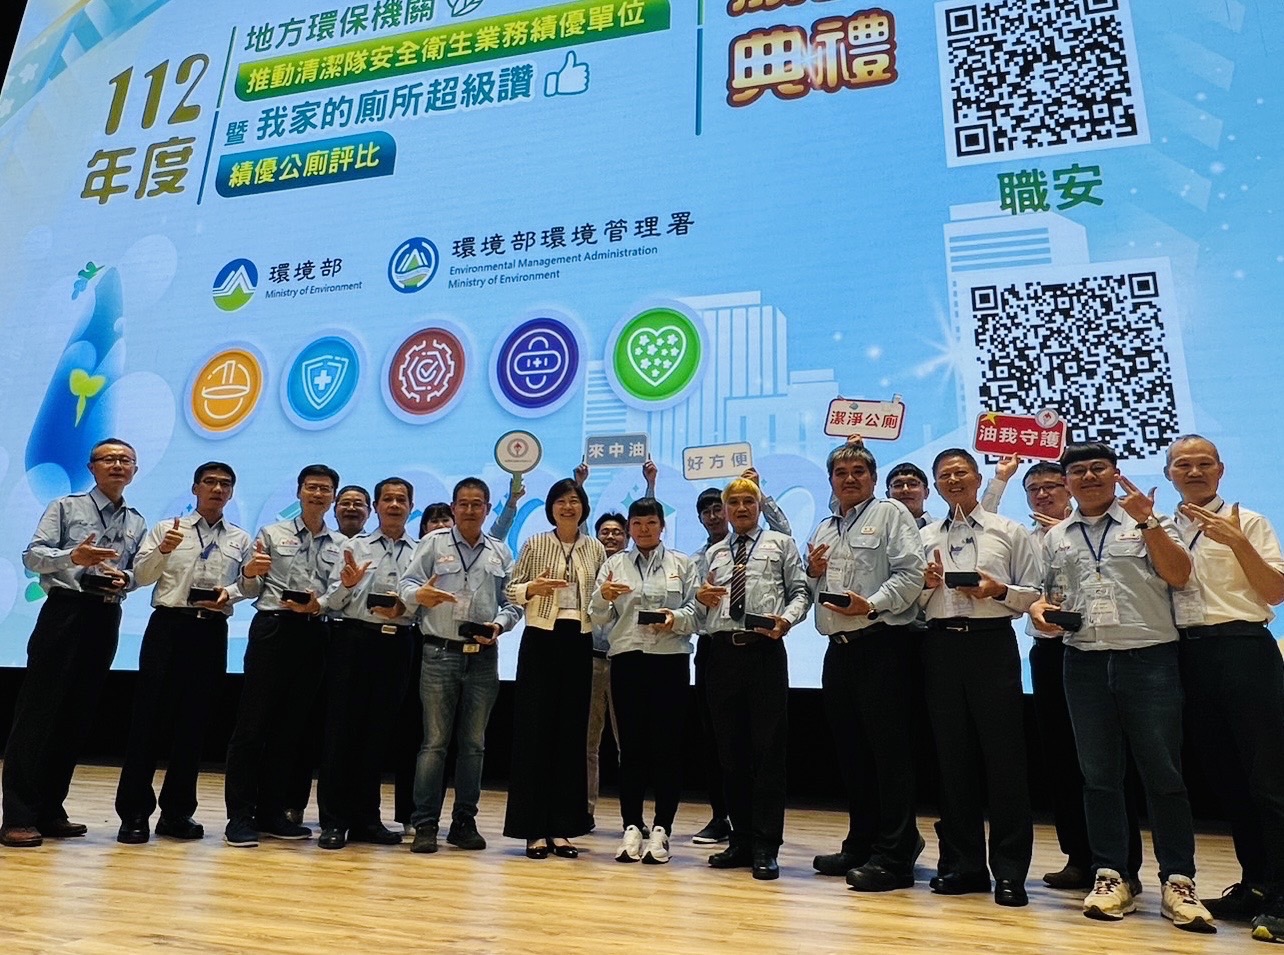 CPC makes clean sweep of prizes in the “Gas Station Category” of the Outstanding Public Toilet Awards sponsored by the Ministry of the Environment